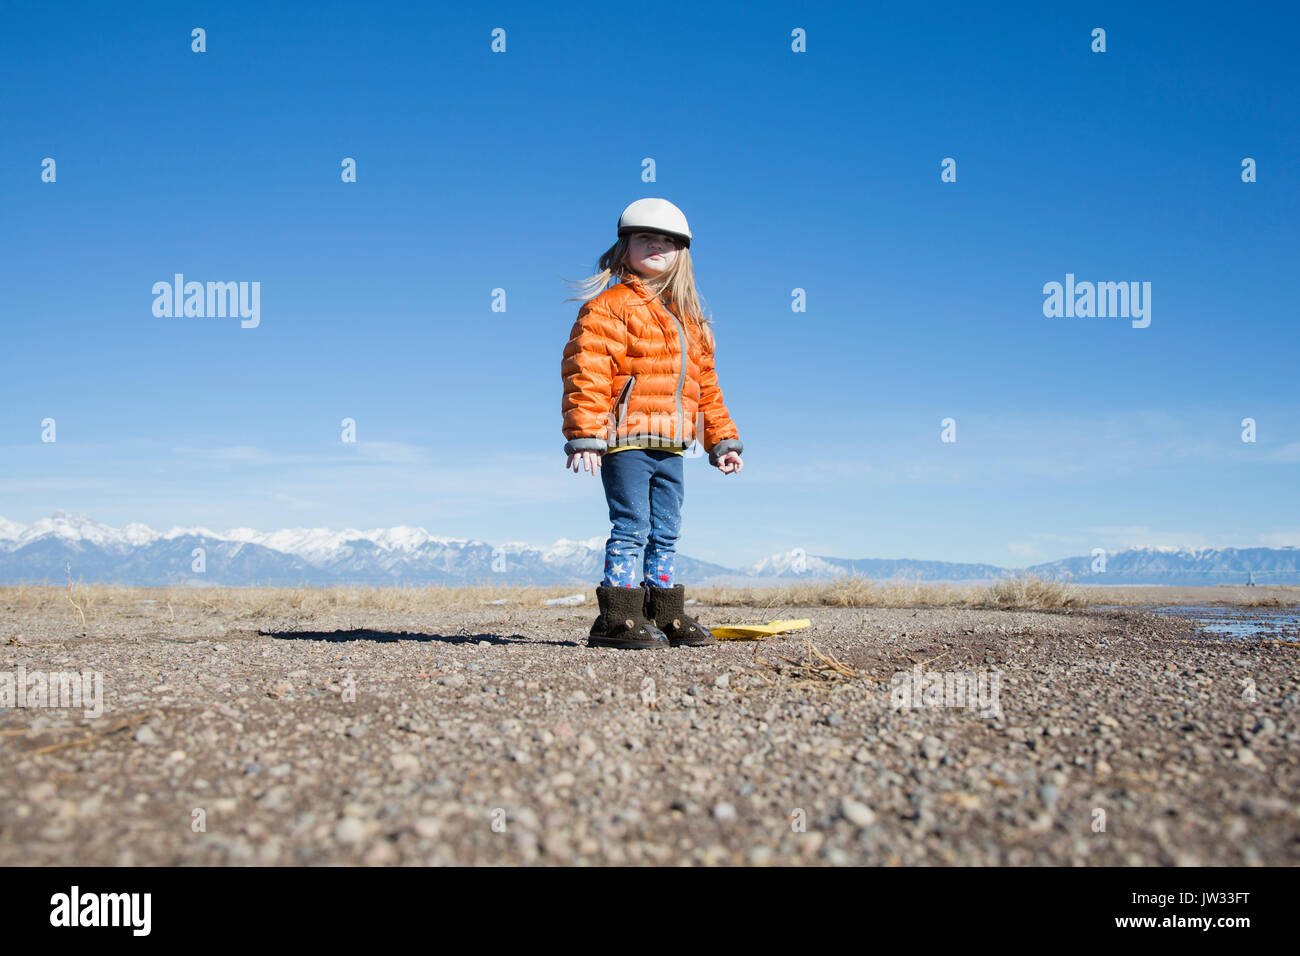 USA, Colorado, Little girl (4-5) dressed in orange padded jacket and flat cap Stock Photo